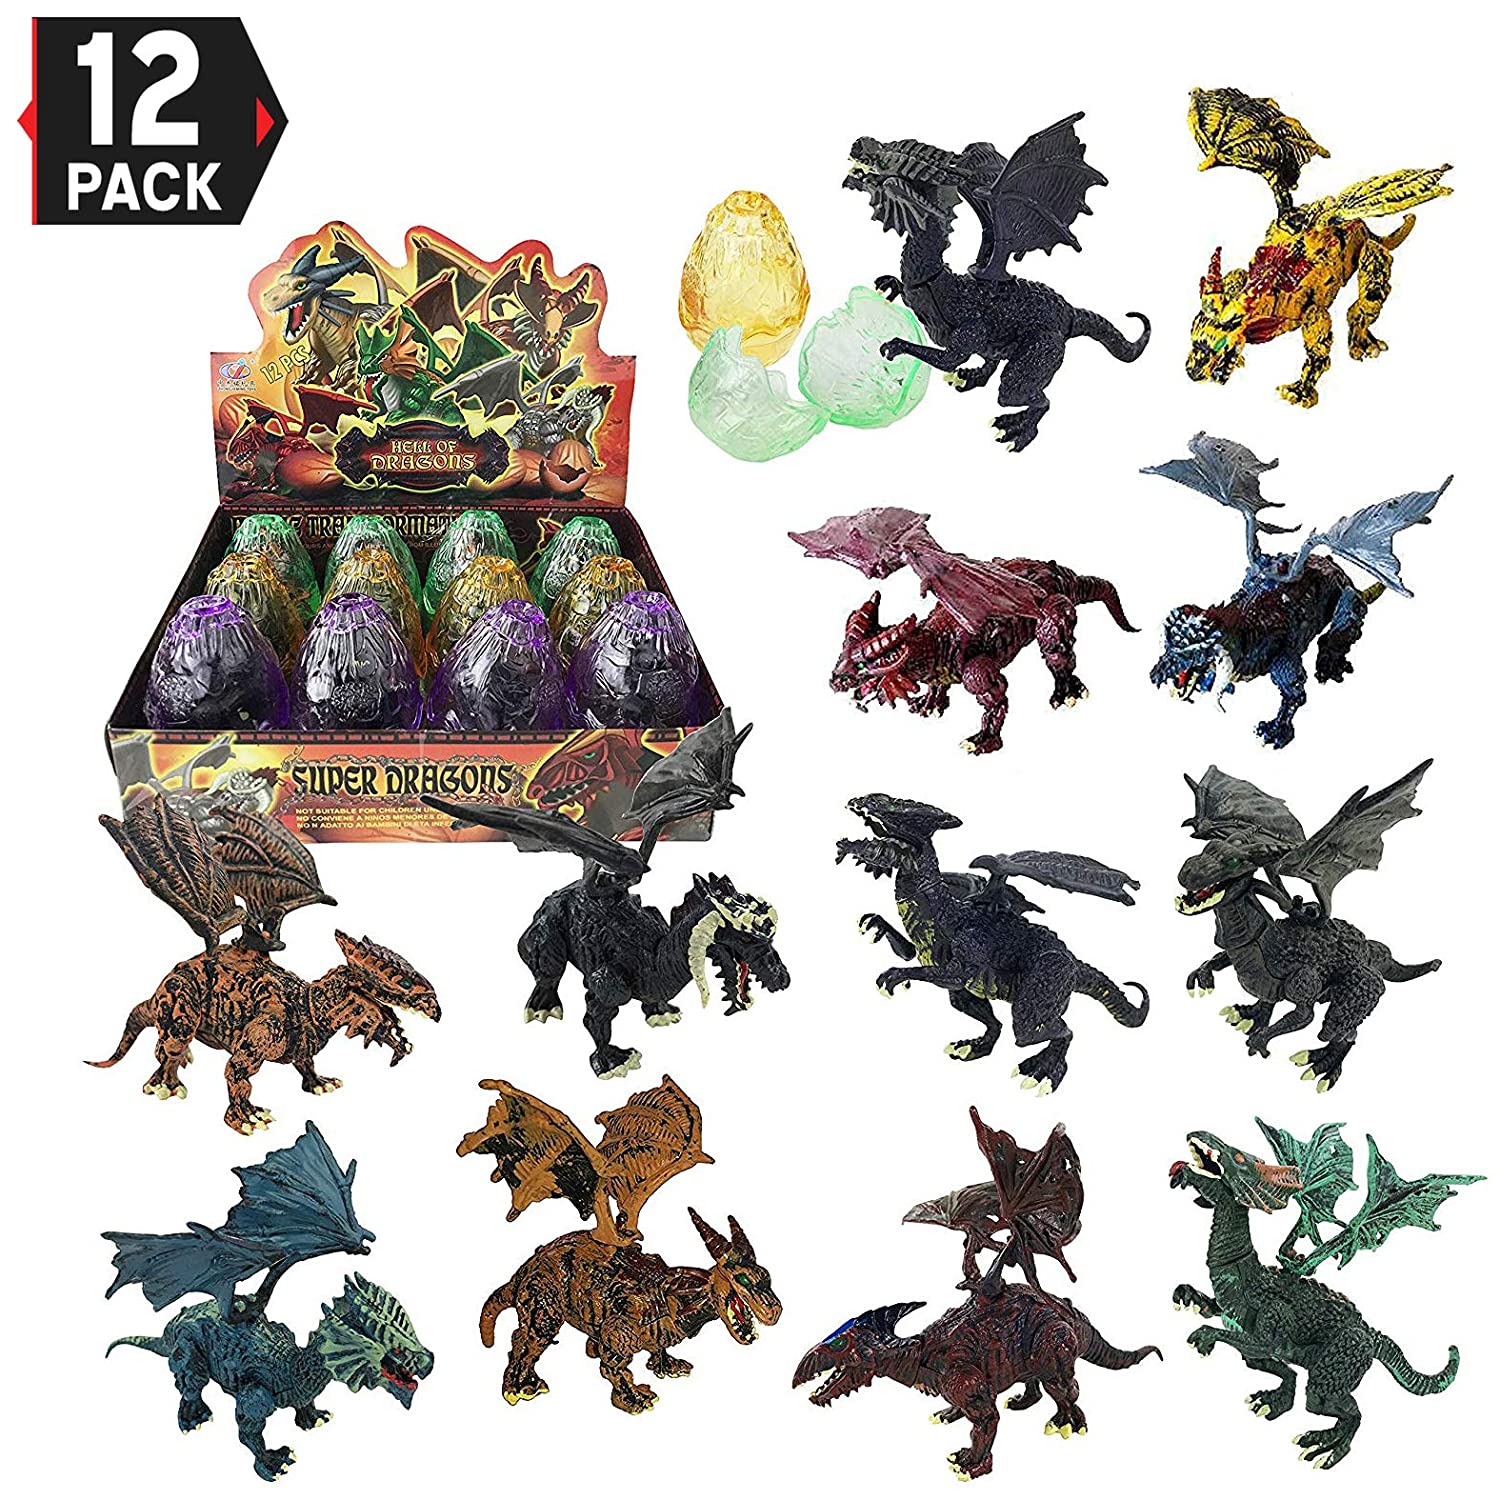 Liberty Imports 12 Pack Deluxe 3D Action Figures Realistic Figurine Puzzles in Jurassic Hatching Eggs